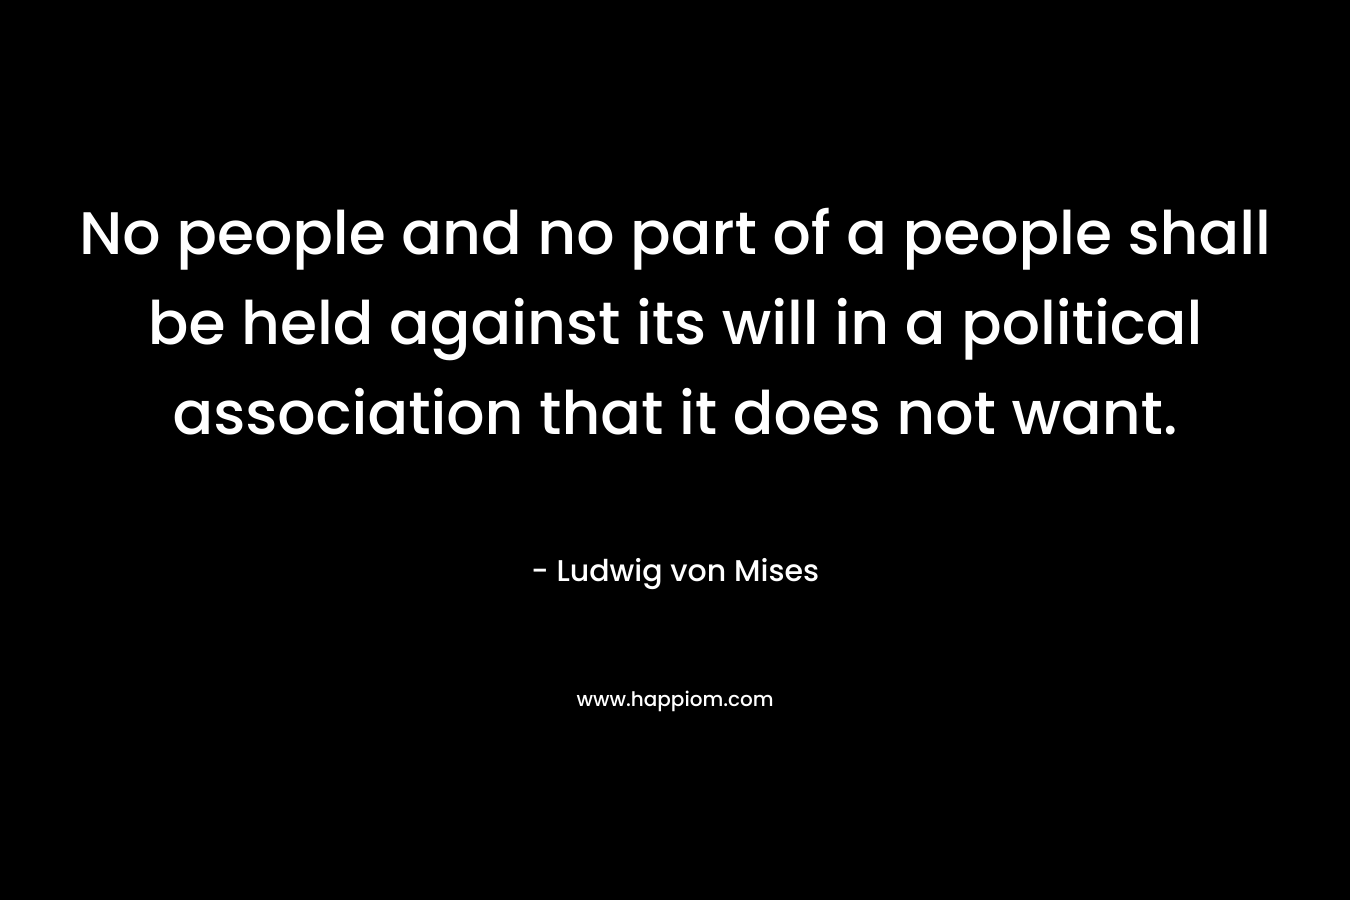 No people and no part of a people shall be held against its will in a political association that it does not want. – Ludwig von Mises